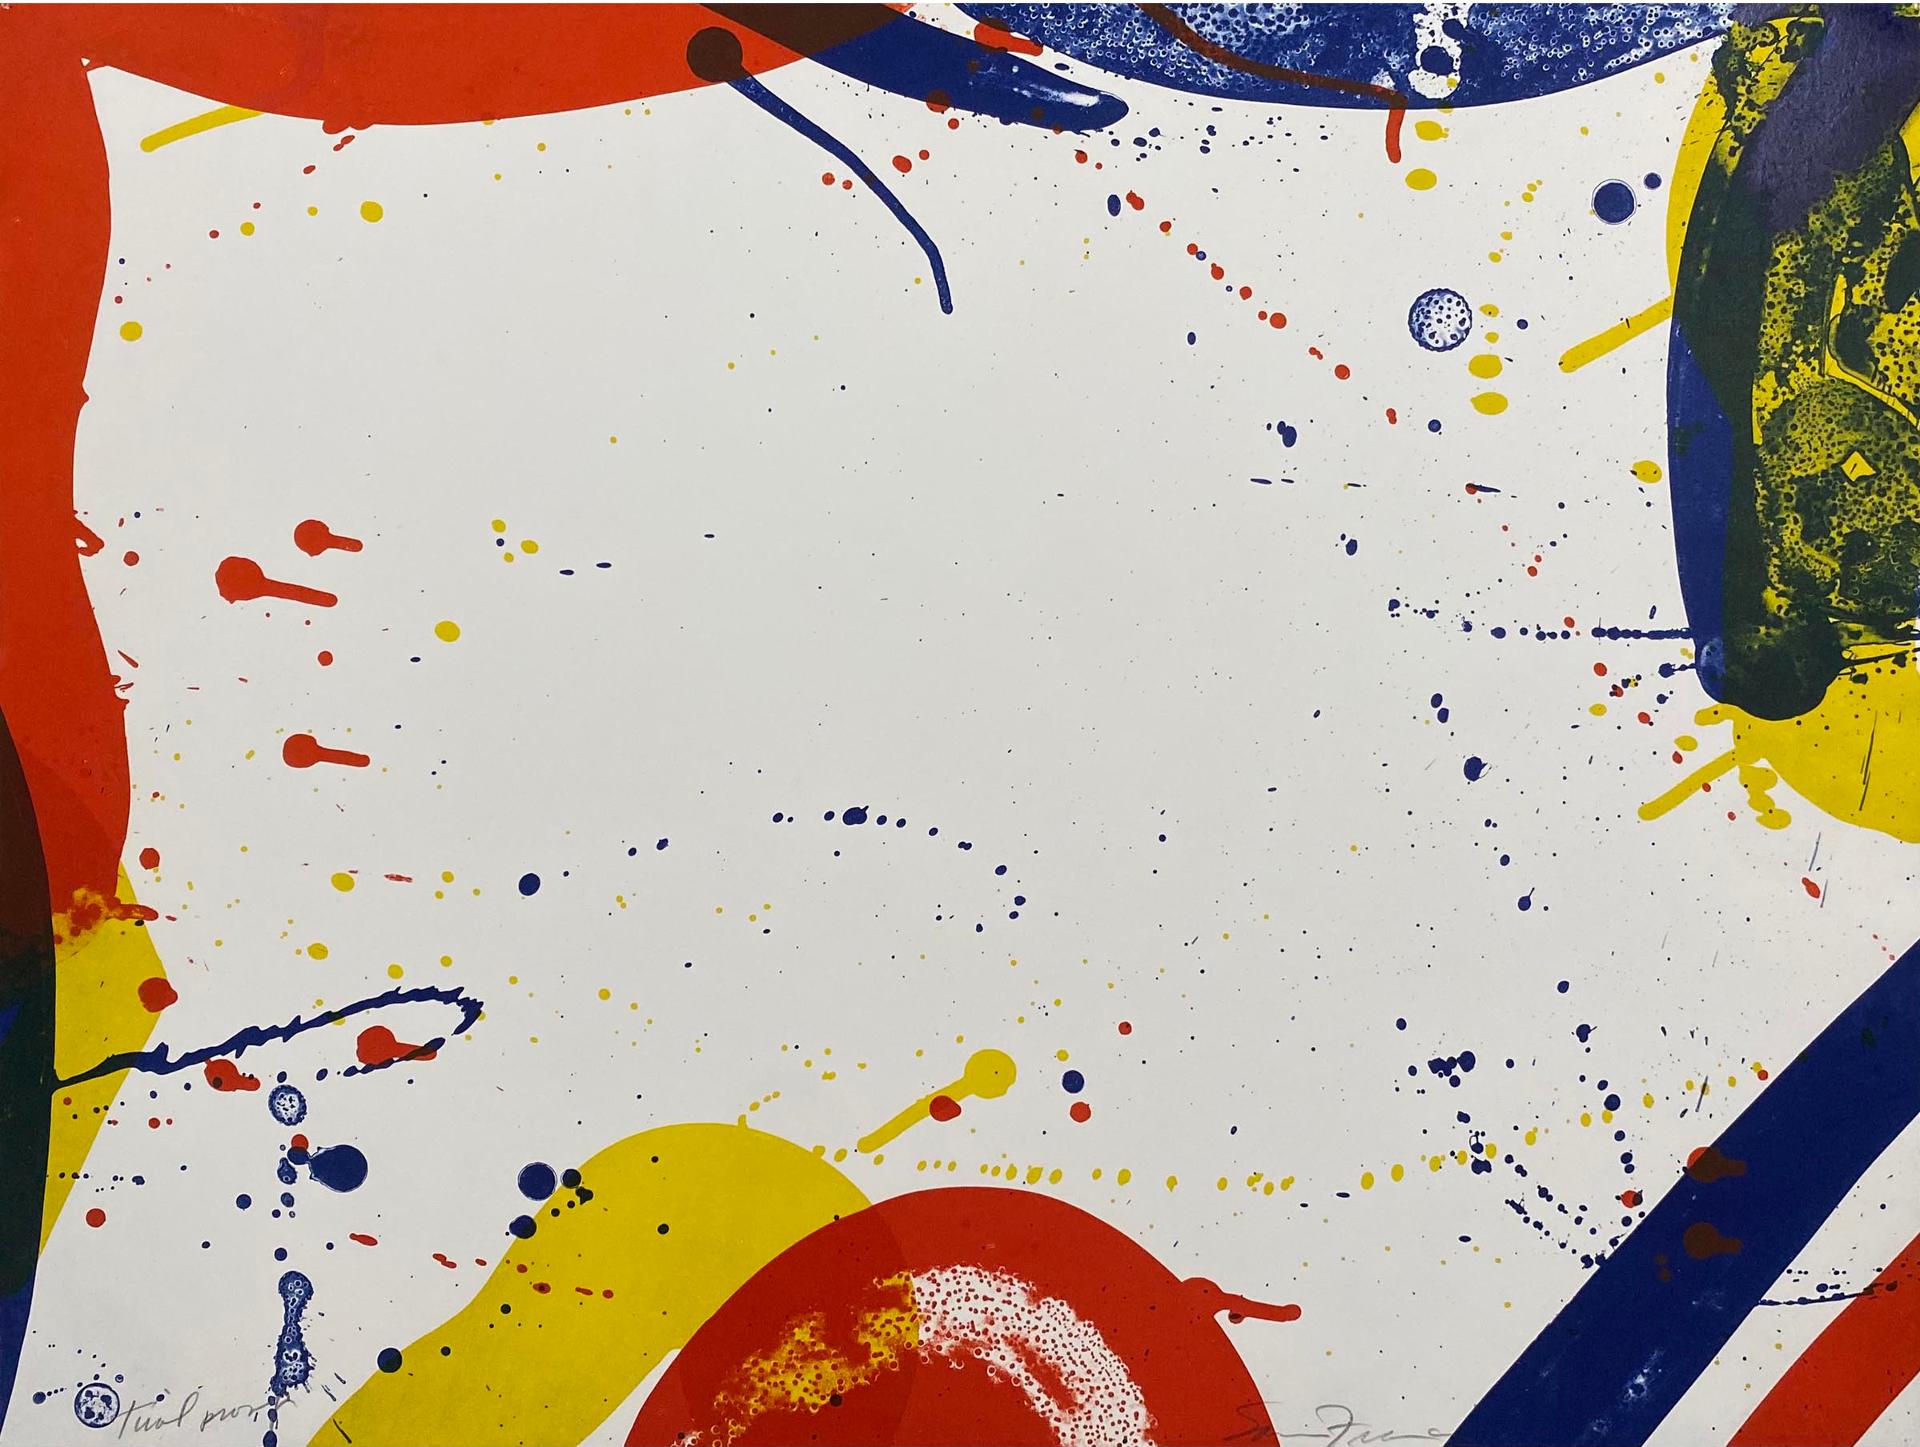 Sam Francis (1923-1994) - UNTITLED, FROM 